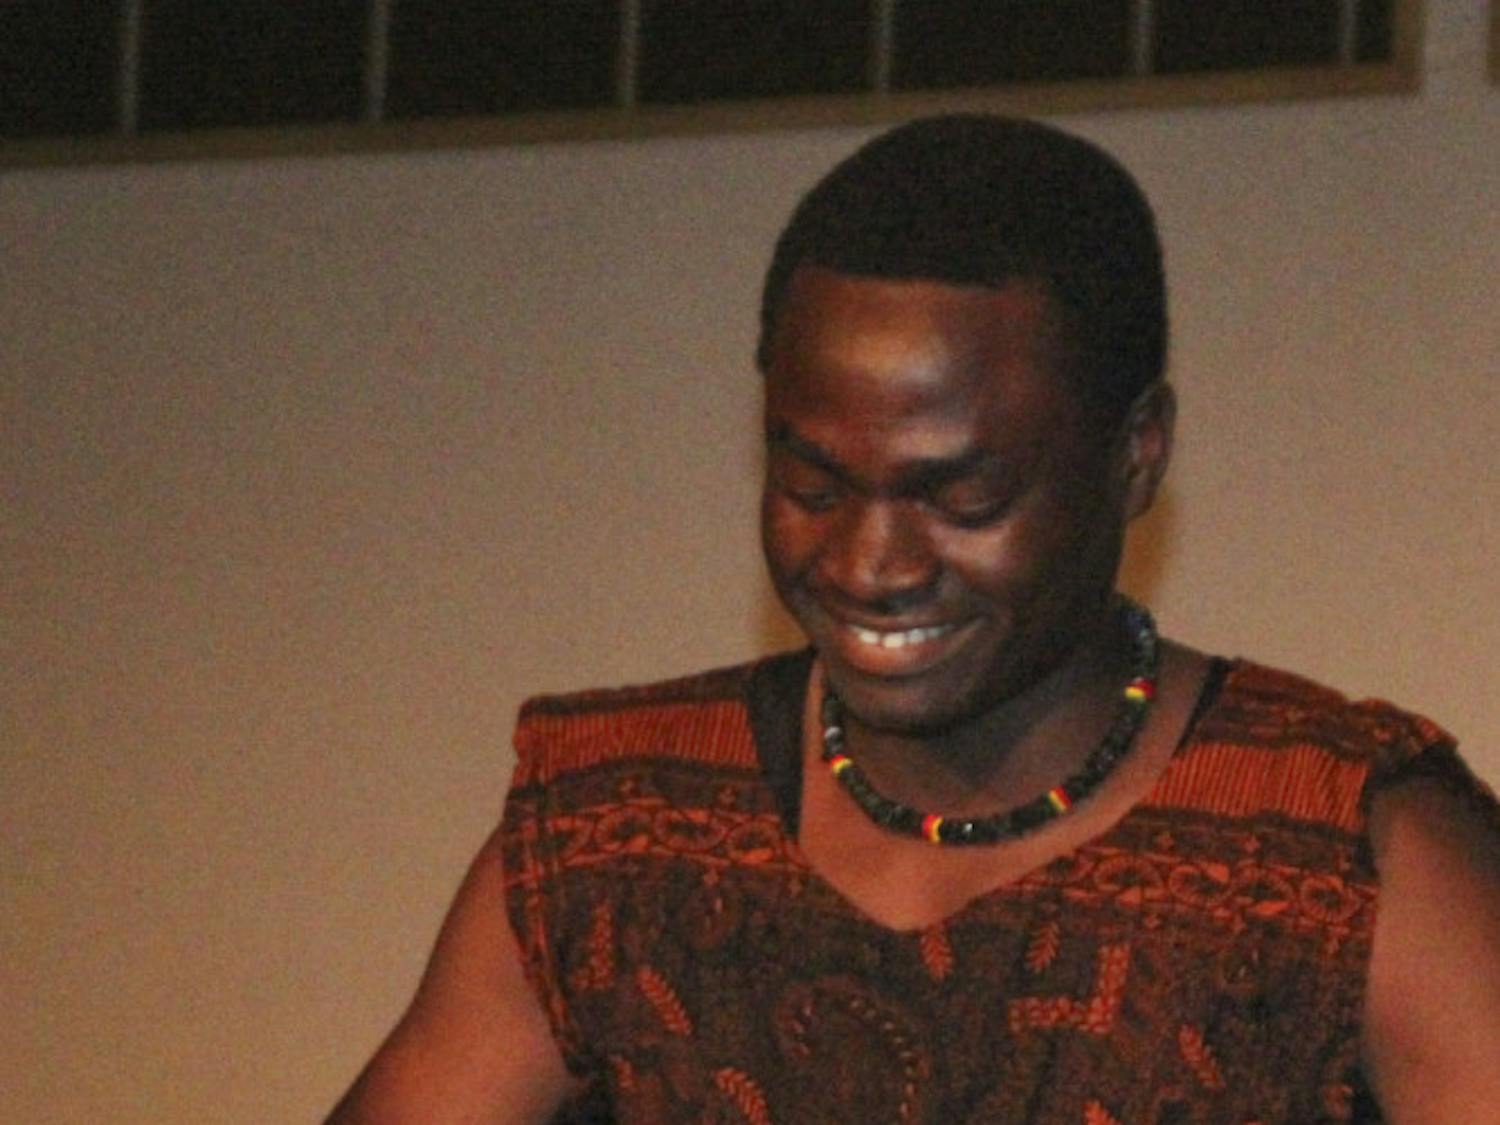 Mussa Nturubika, a 19-year-old UF health science freshman, plays the djembe, a western African drum made of cow skin, in the talent portion of the African Student Union pageant in the Reitz Union Grand Ballroom on Nov. 11, 2015. He competed representing the Democratic Republic of the Congo for the title of Mr. African Student Union.